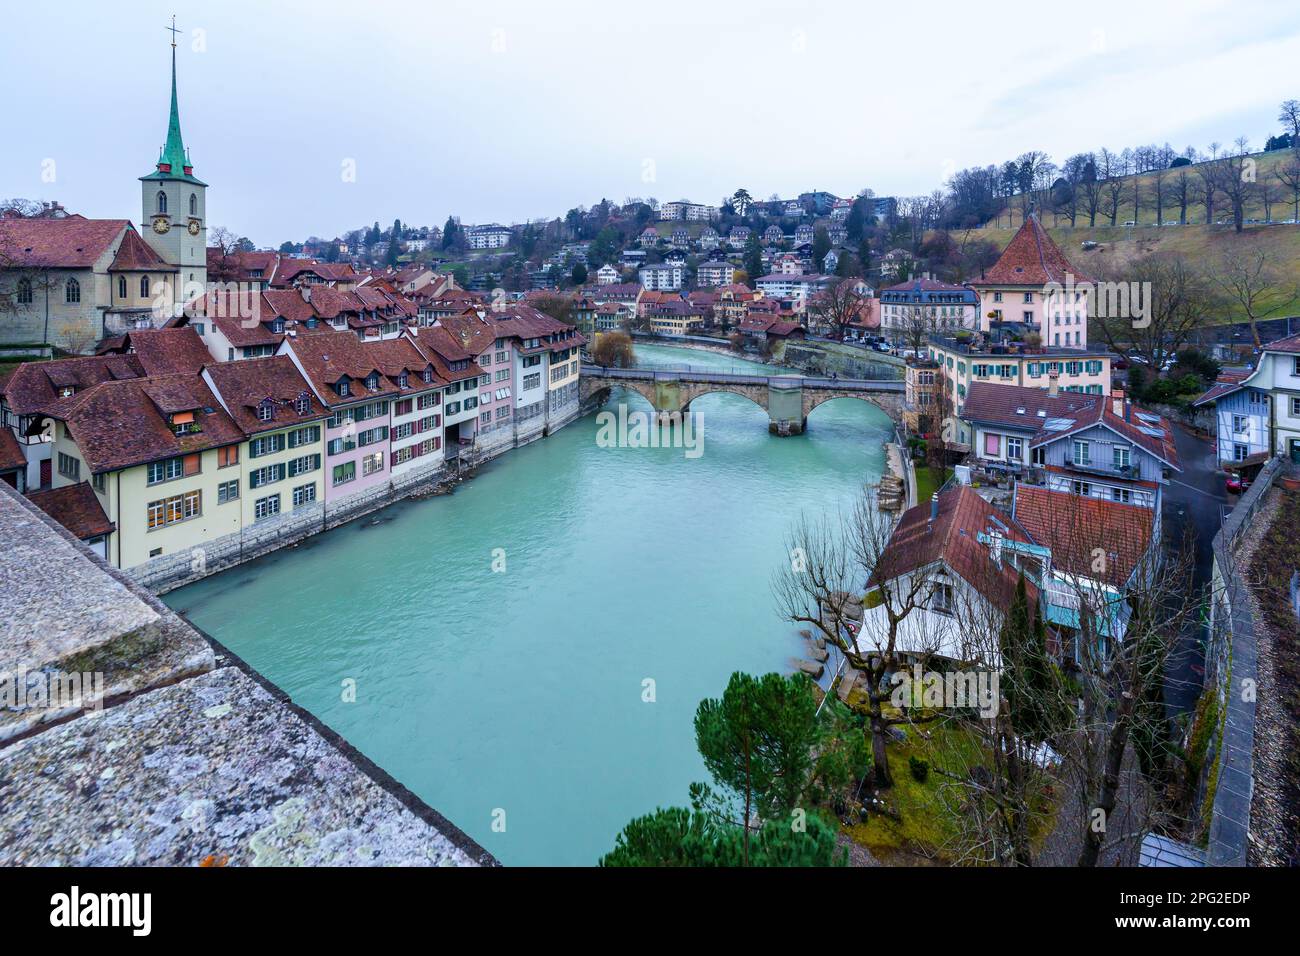 View of the Aare River, Nydeggkirche church, Untertorbrucke bridge, with various buildings, locals, and visitors, in Bern, Switzerland Stock Photo